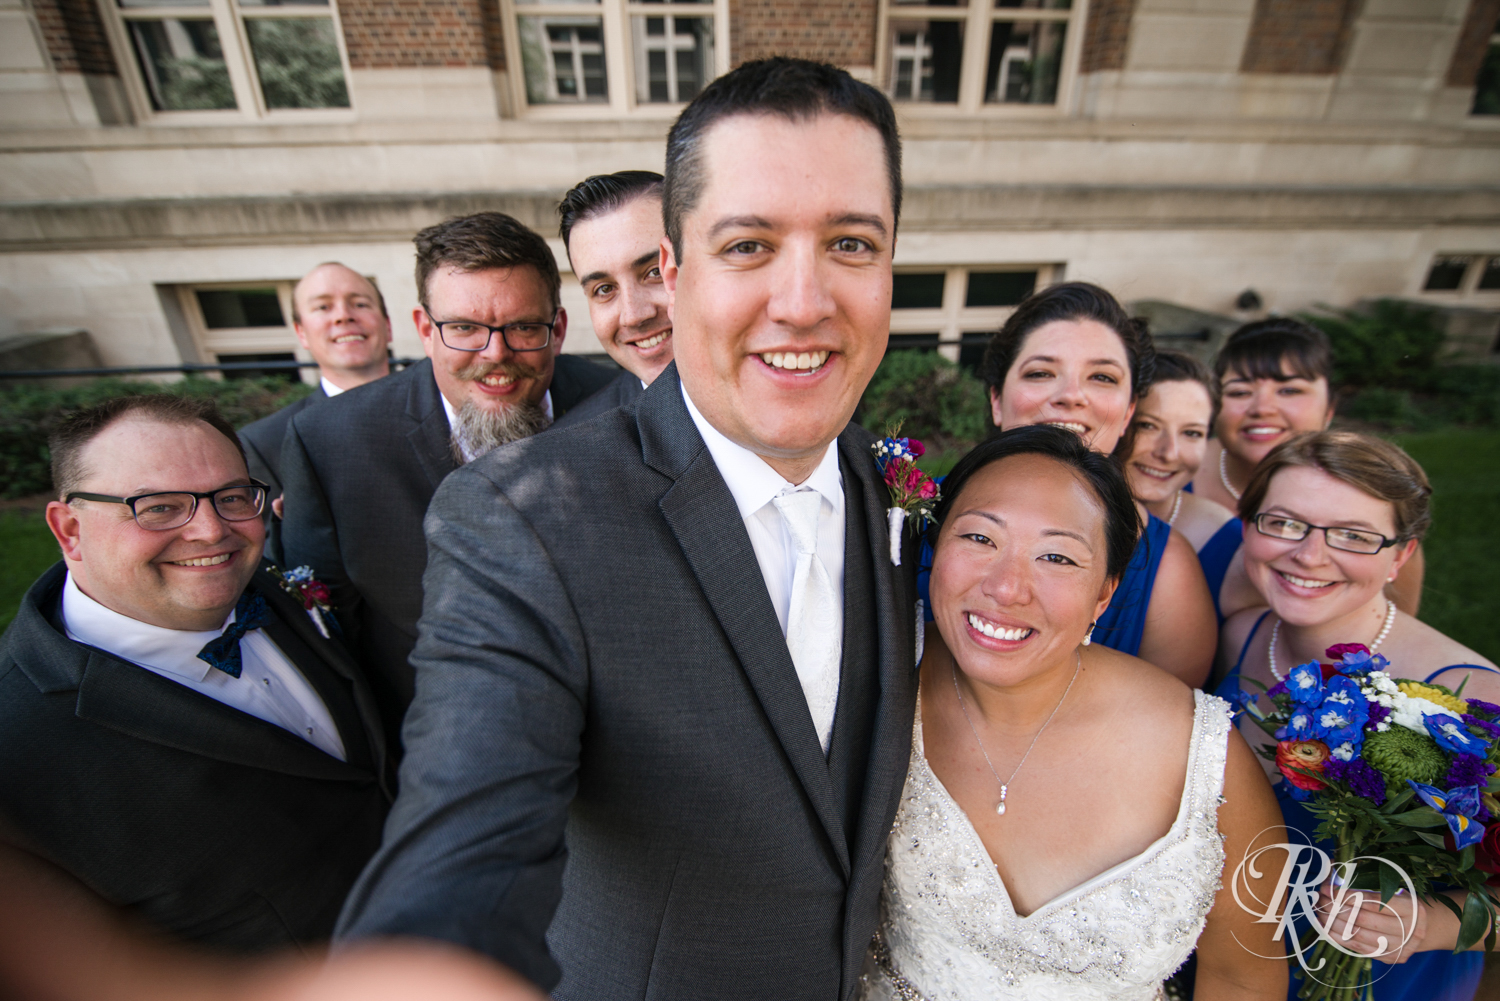 Wedding party smiles and laughs at the University of Minnesota in Minneapolis, Minnesota.